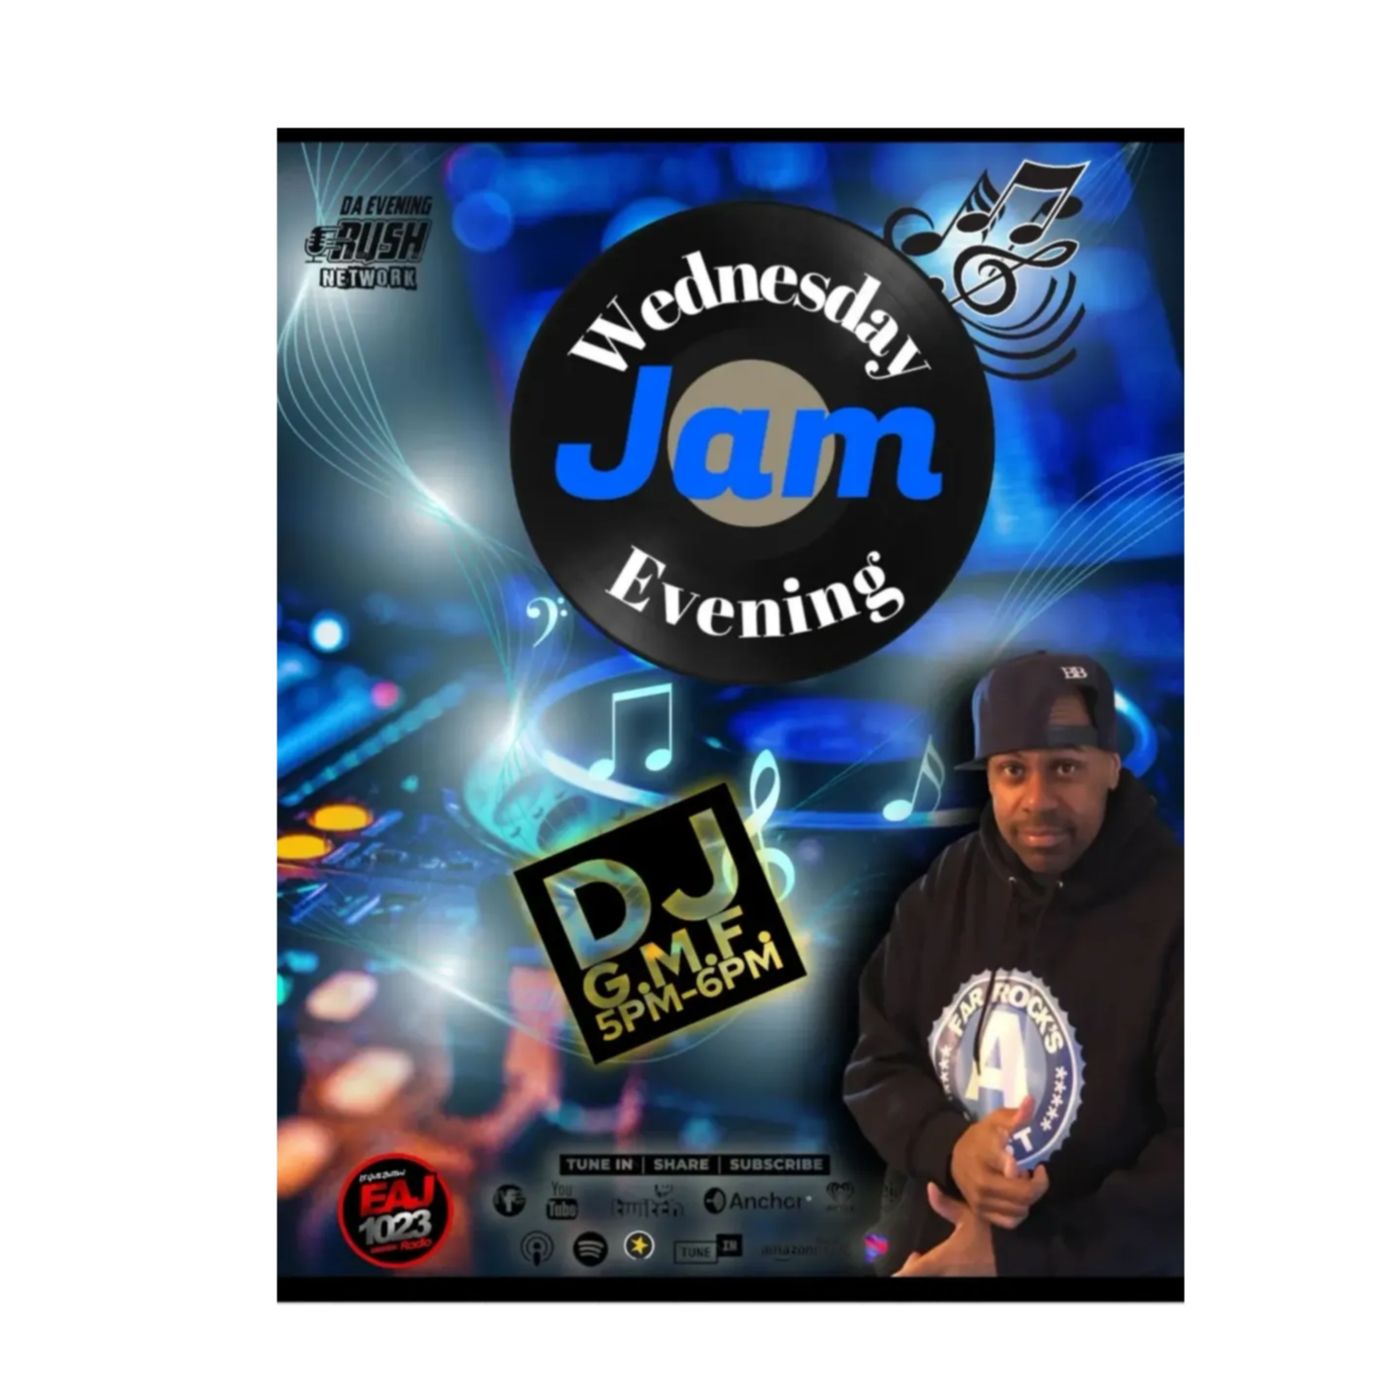 Wednesday Evening Jam With Dj G.M.F of Projects Sounds (Ep6)